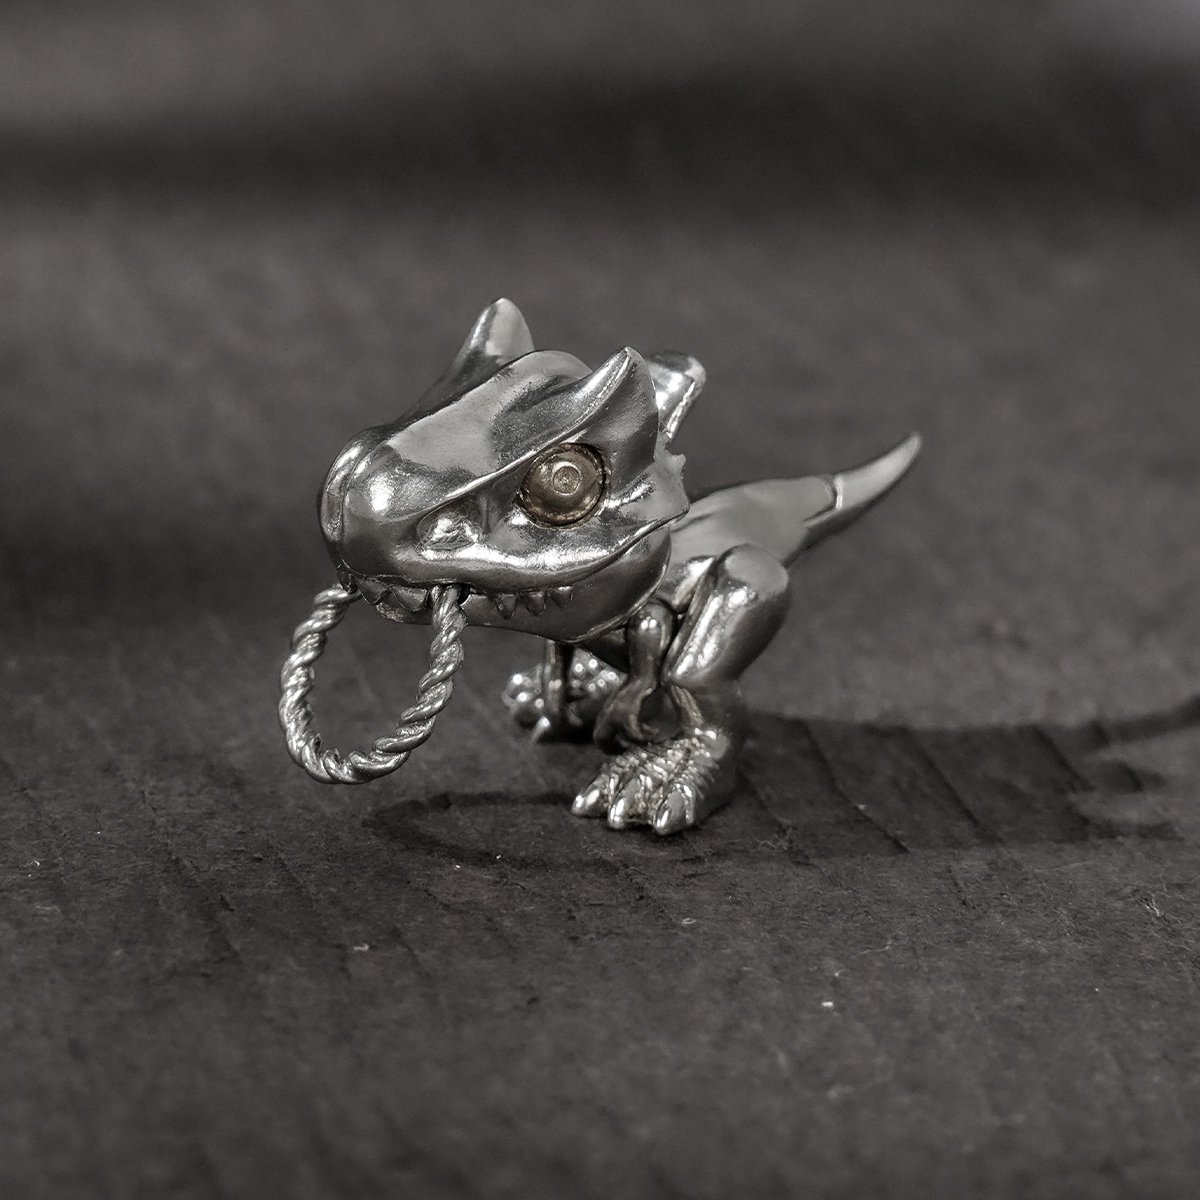 S925 Silver Artistic Carnotaurus Dino Retro Pendant with Moveable Limbs and Biteable Mouth